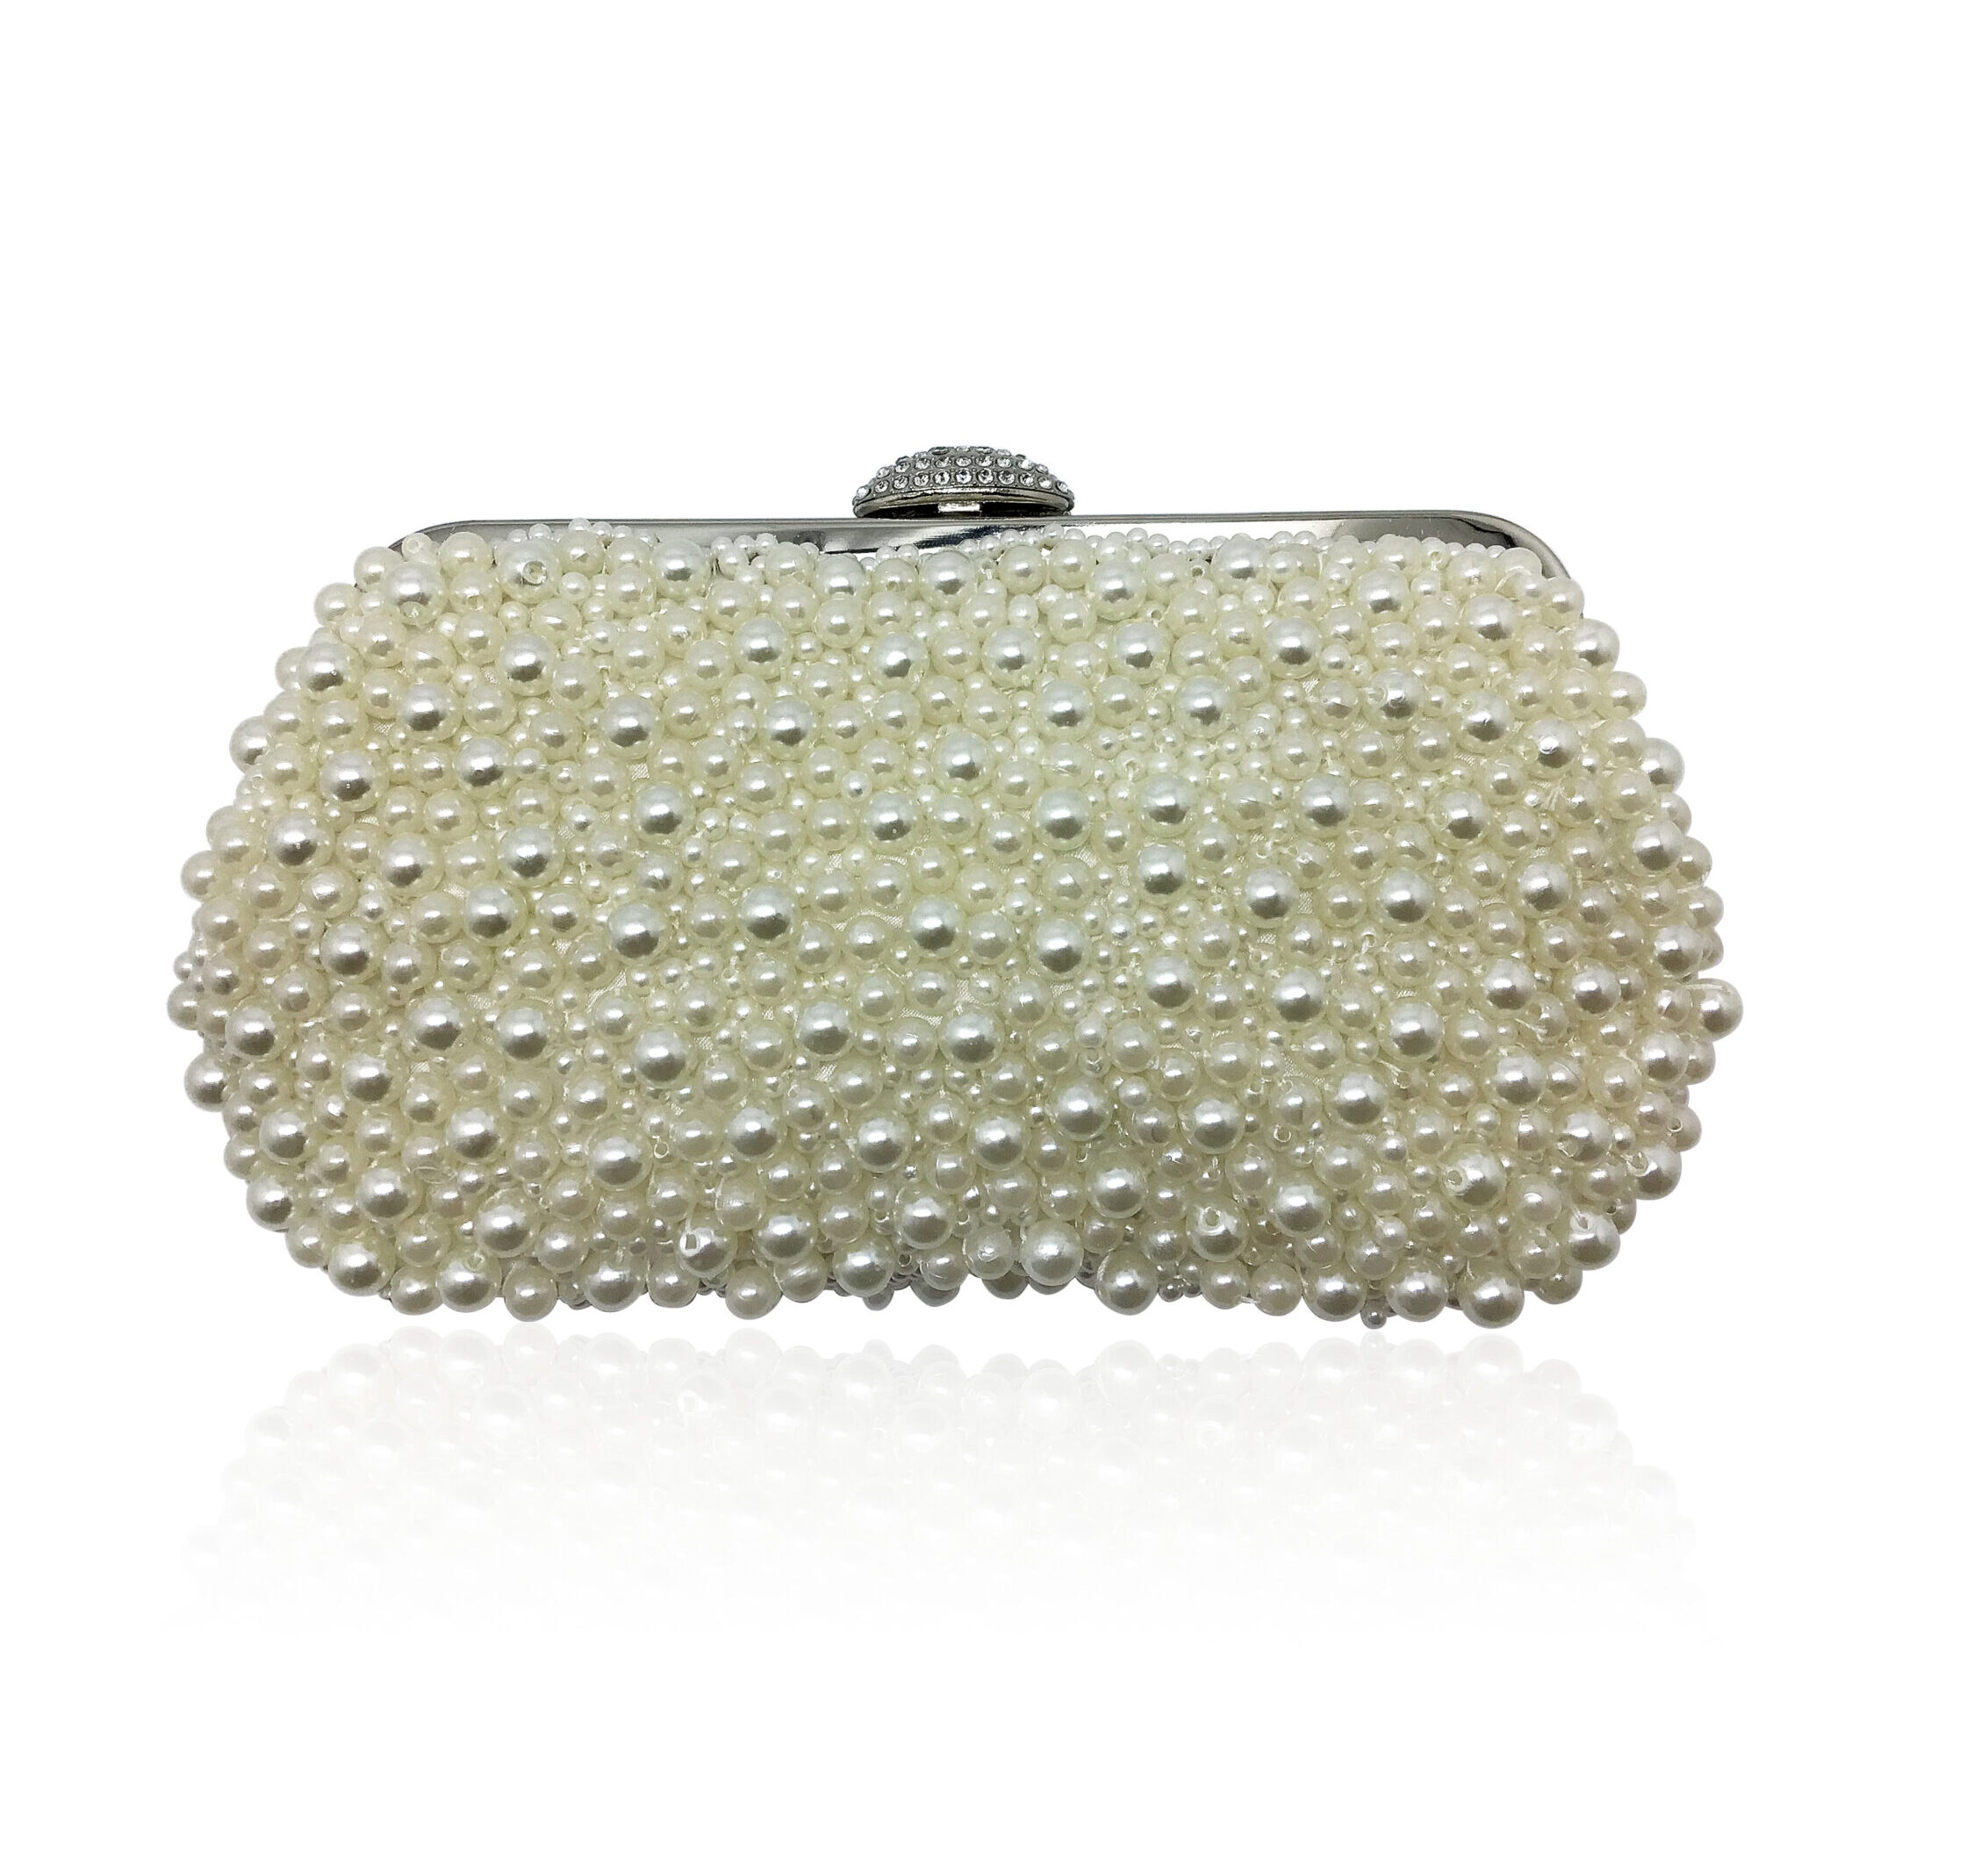 Ivory Pearl Clutch Bag|Neena|Jeanette Maree|Shop Online Now